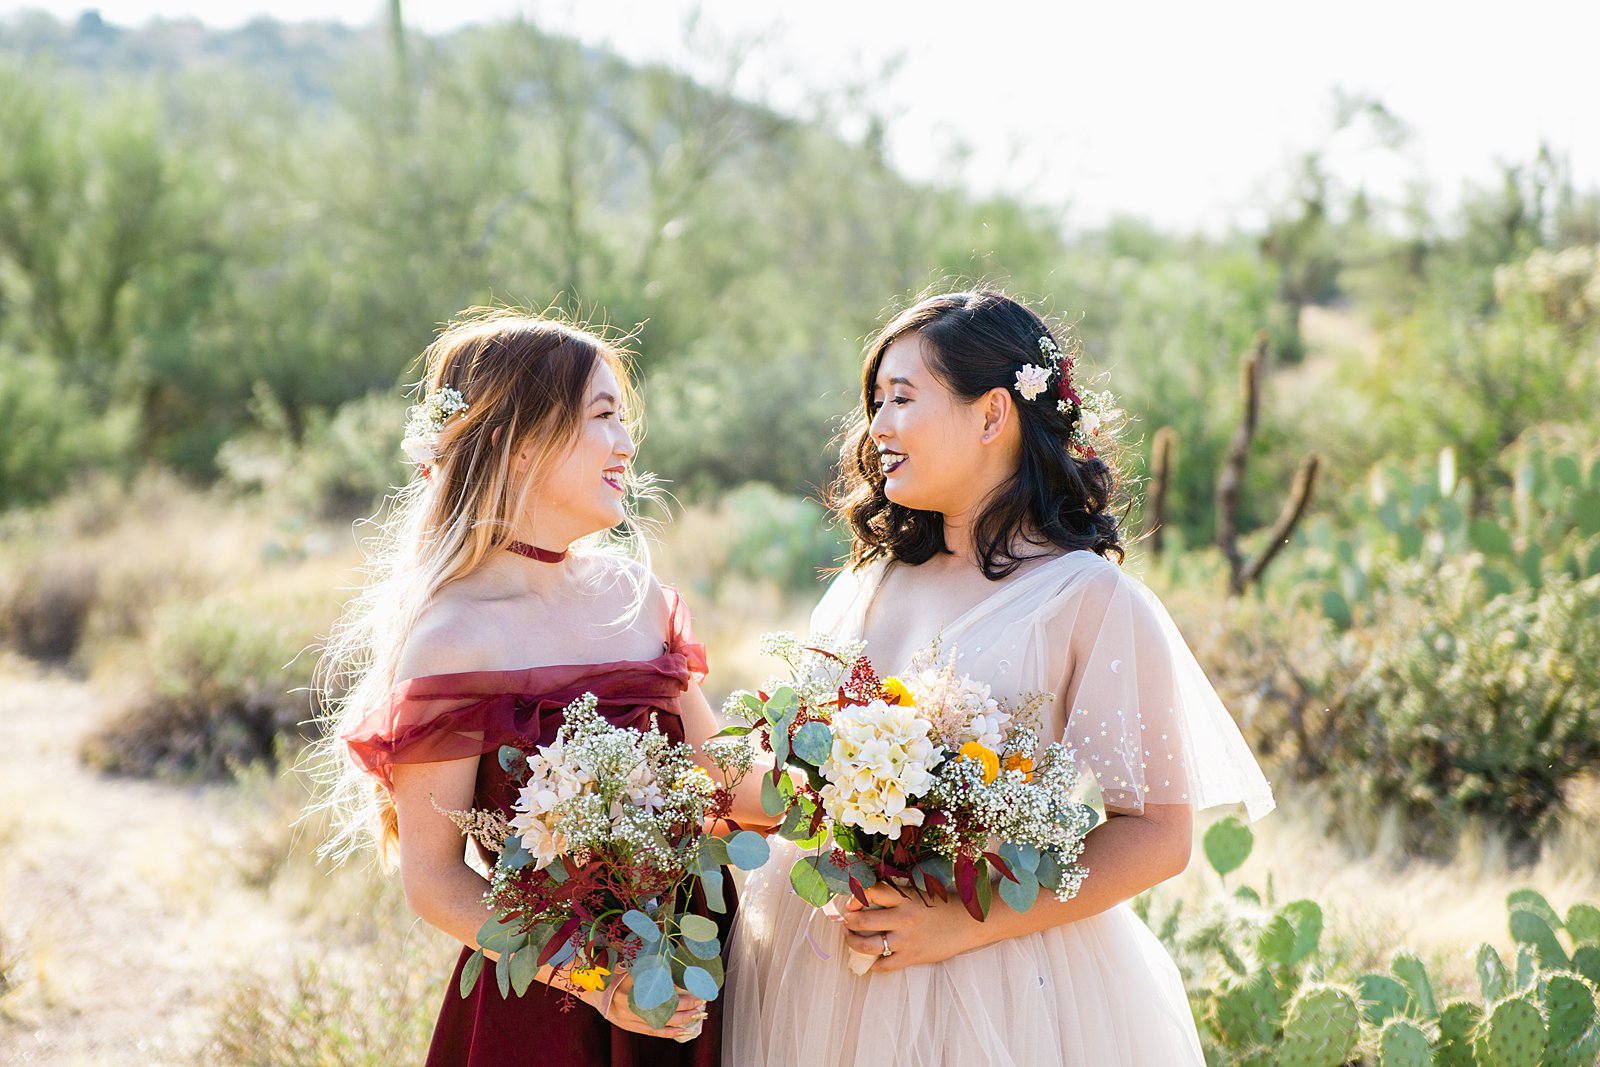 Bride and bridesmaid together at a Cloth and Flame Superstition Mountain wedding by Arizona wedding photographer PMA Photography.